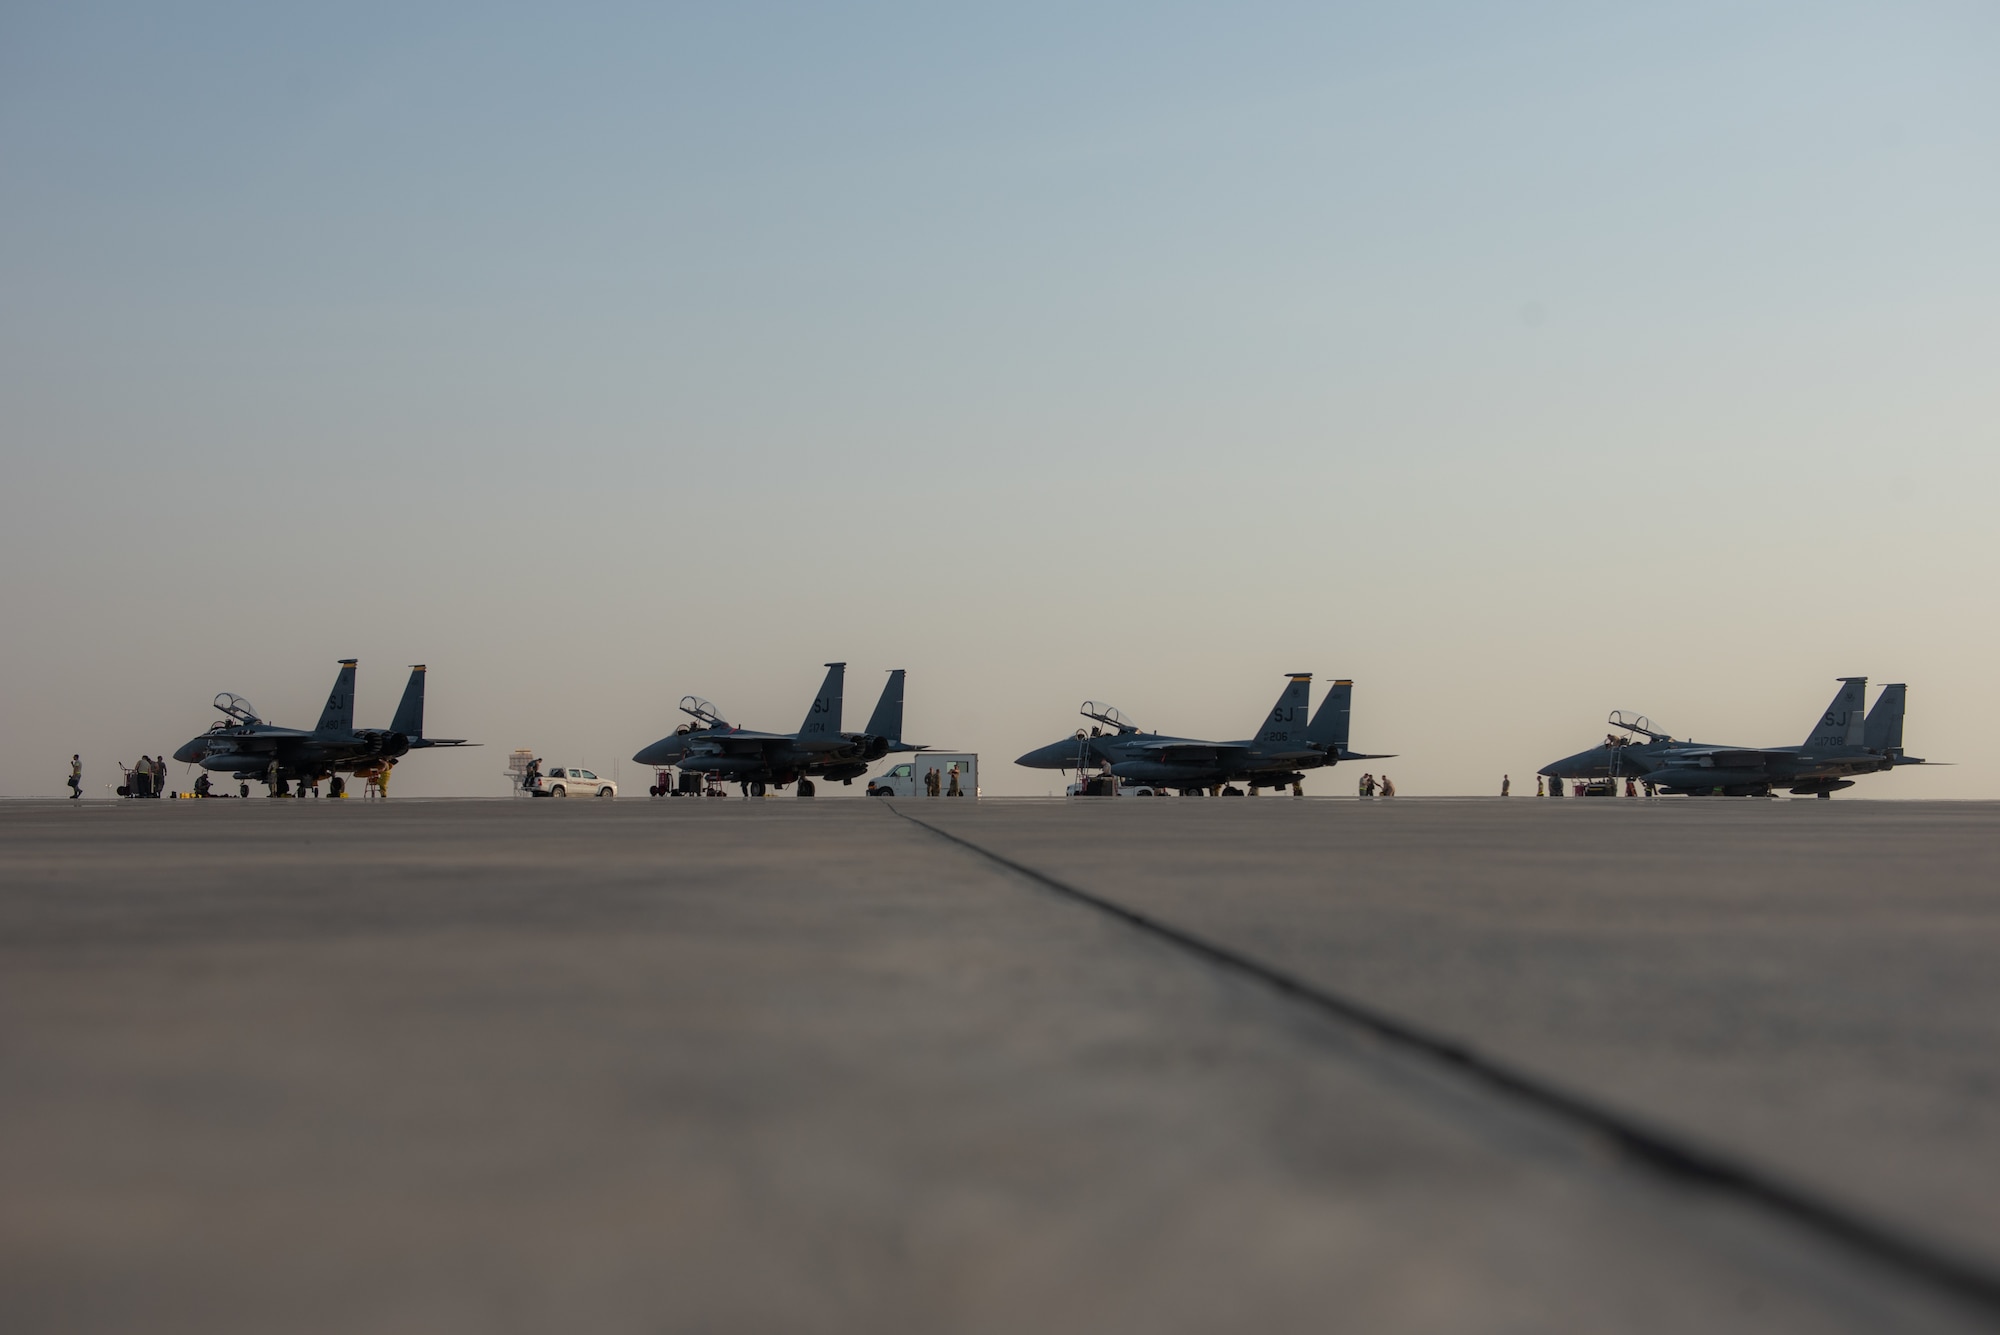 Four F-15E Strike Eagles from the 336th Fighter Squadron, 4th Fighter Wing at Seymour Johnson Air Force Base, North Carolina sit on the airfield at Al Dhafra Air Base, United Arab Emirates, June 13, 2019. The F-15E’s joined ADABs inventory of other fighters to include F-15C Eagles and F-35A Lightning IIs. (U.S. Air Force photo by Staff Sgt. Chris Thornbury)